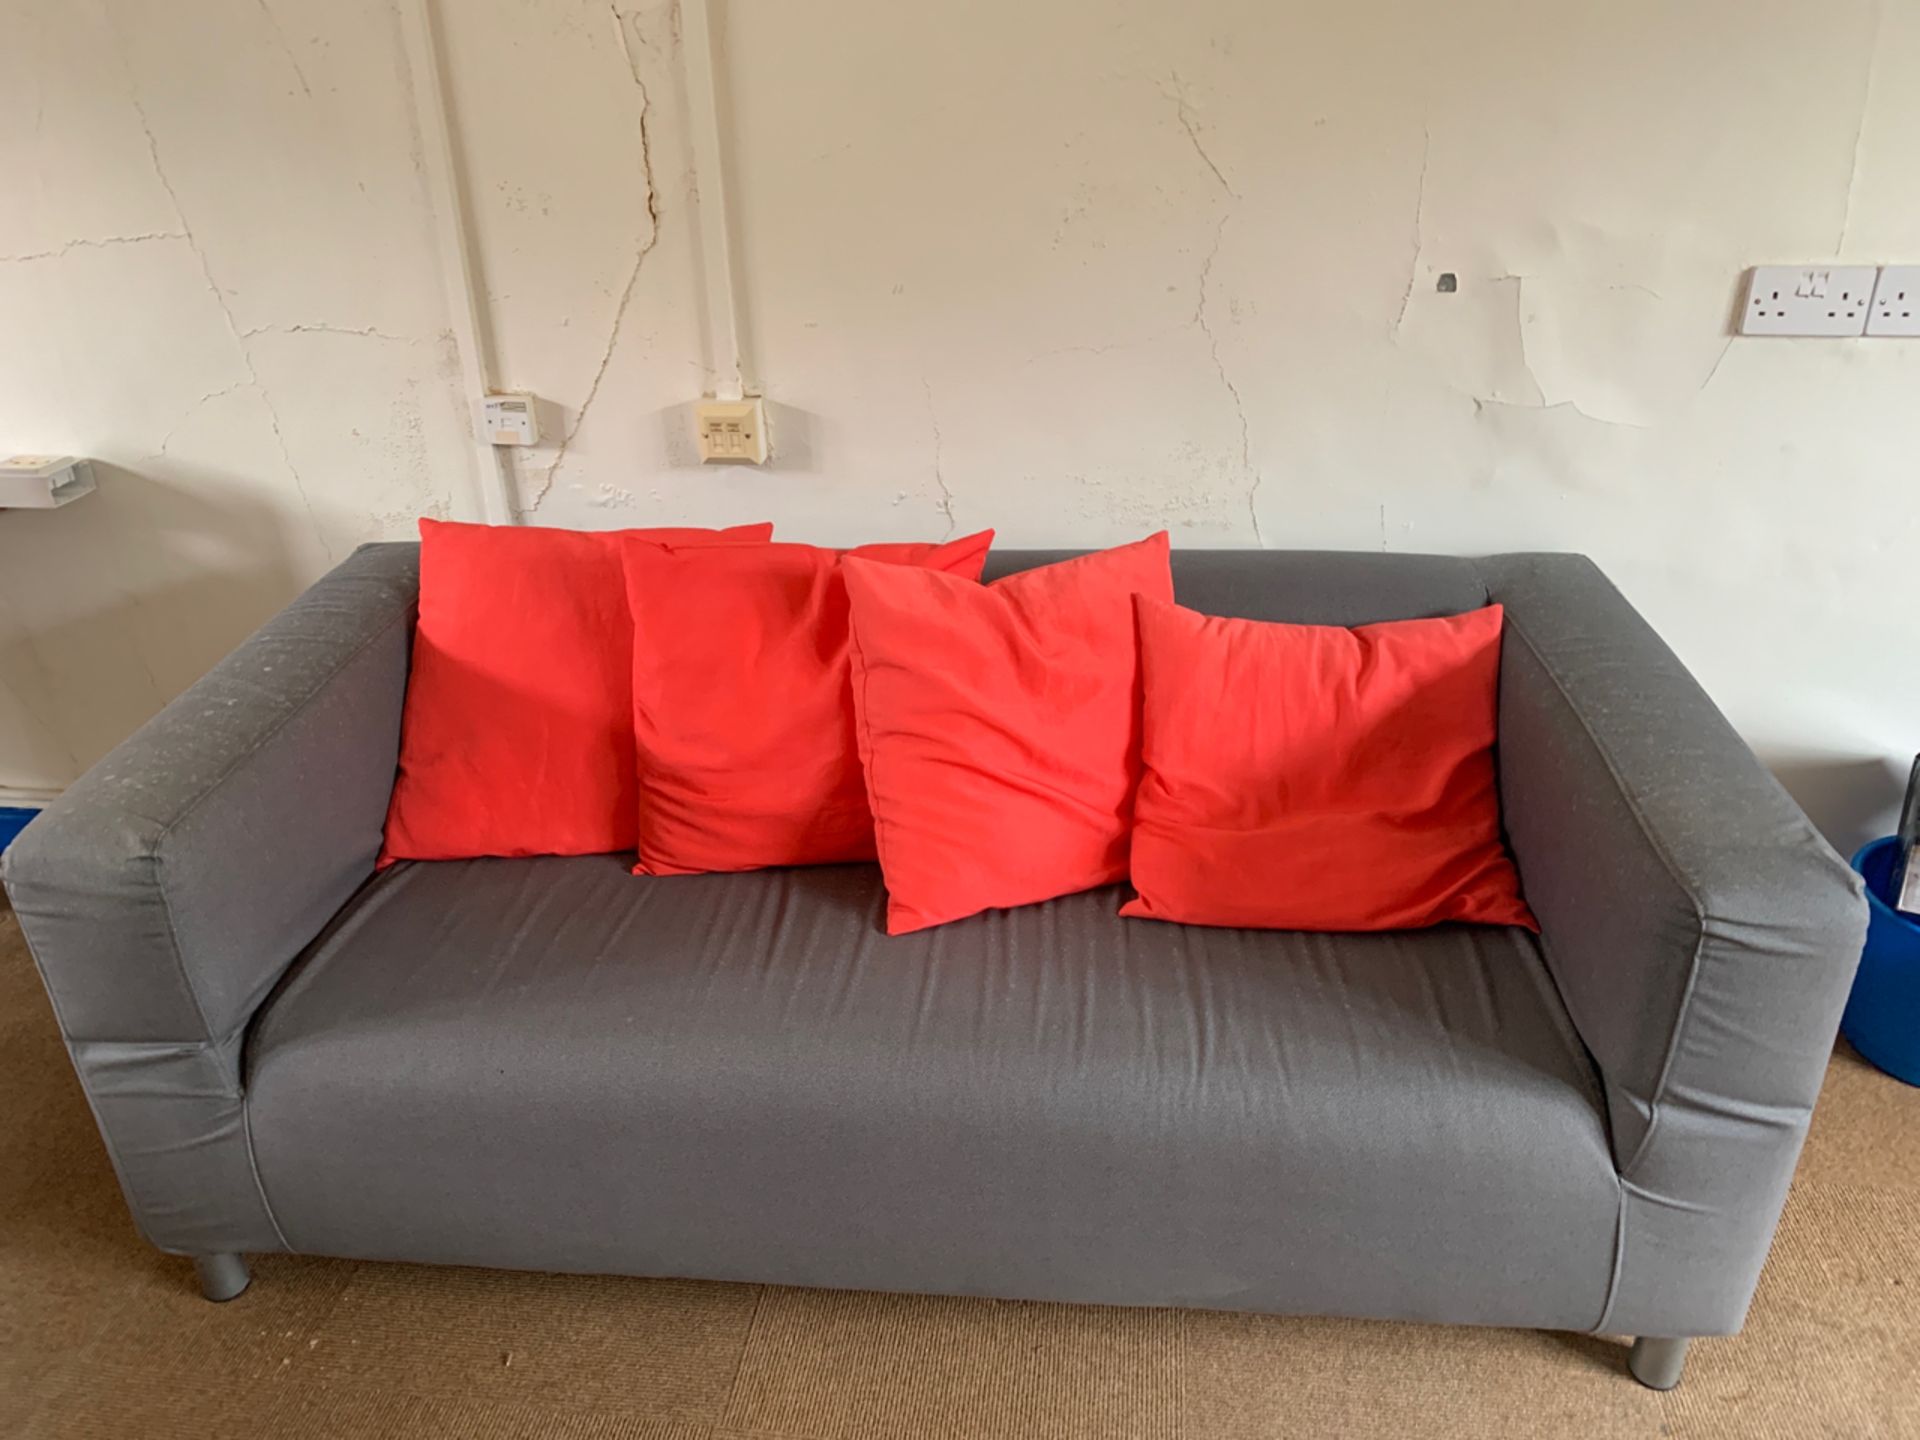 Two Seater Upholstered Sofa - Image 2 of 2